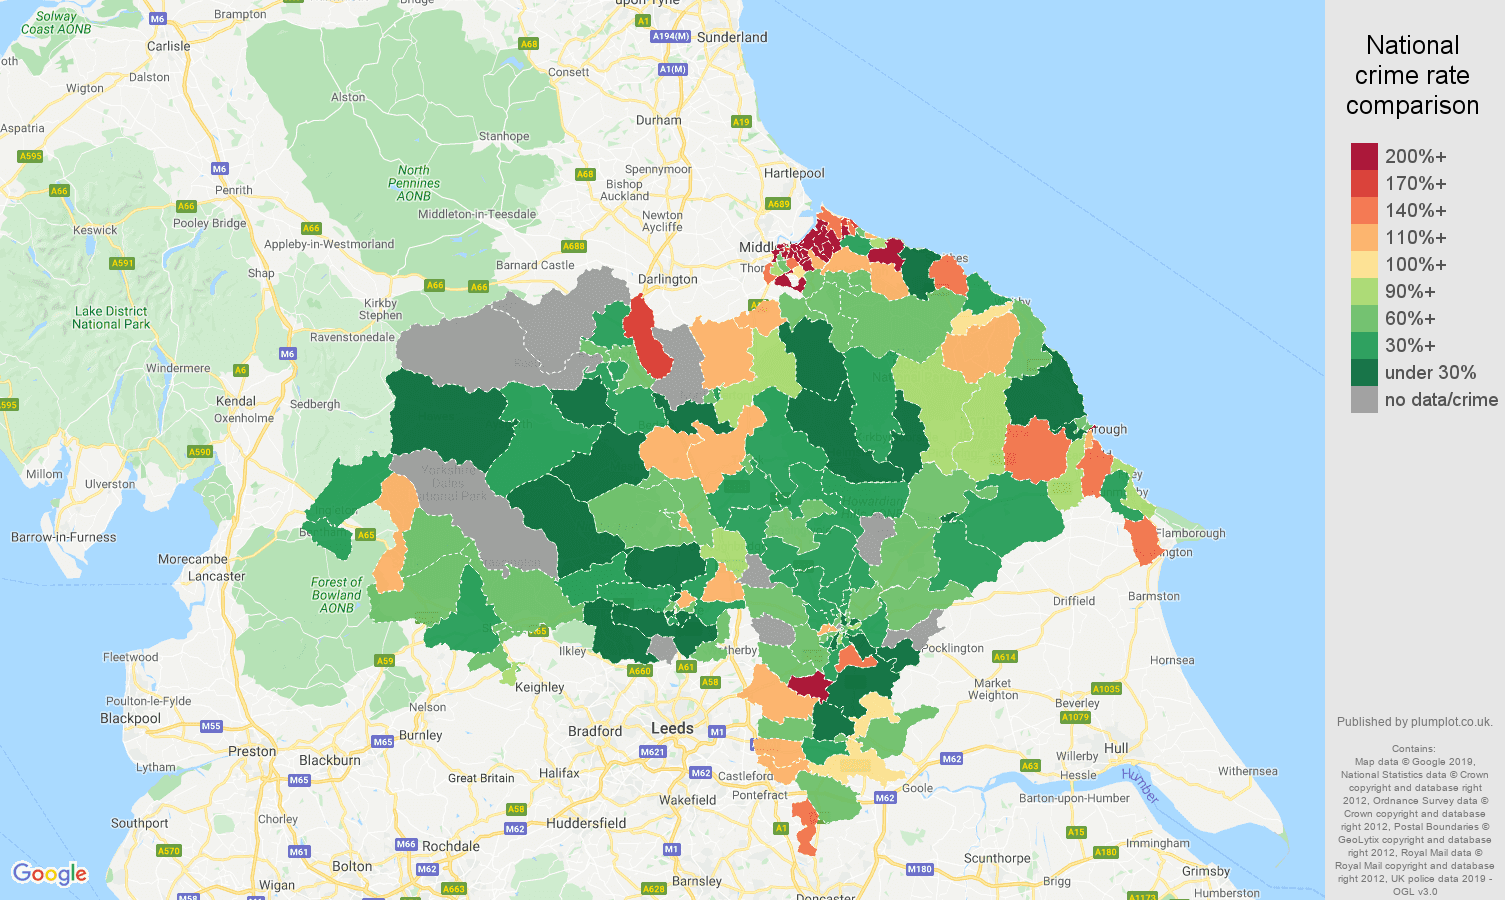 North Yorkshire other crime rate comparison map